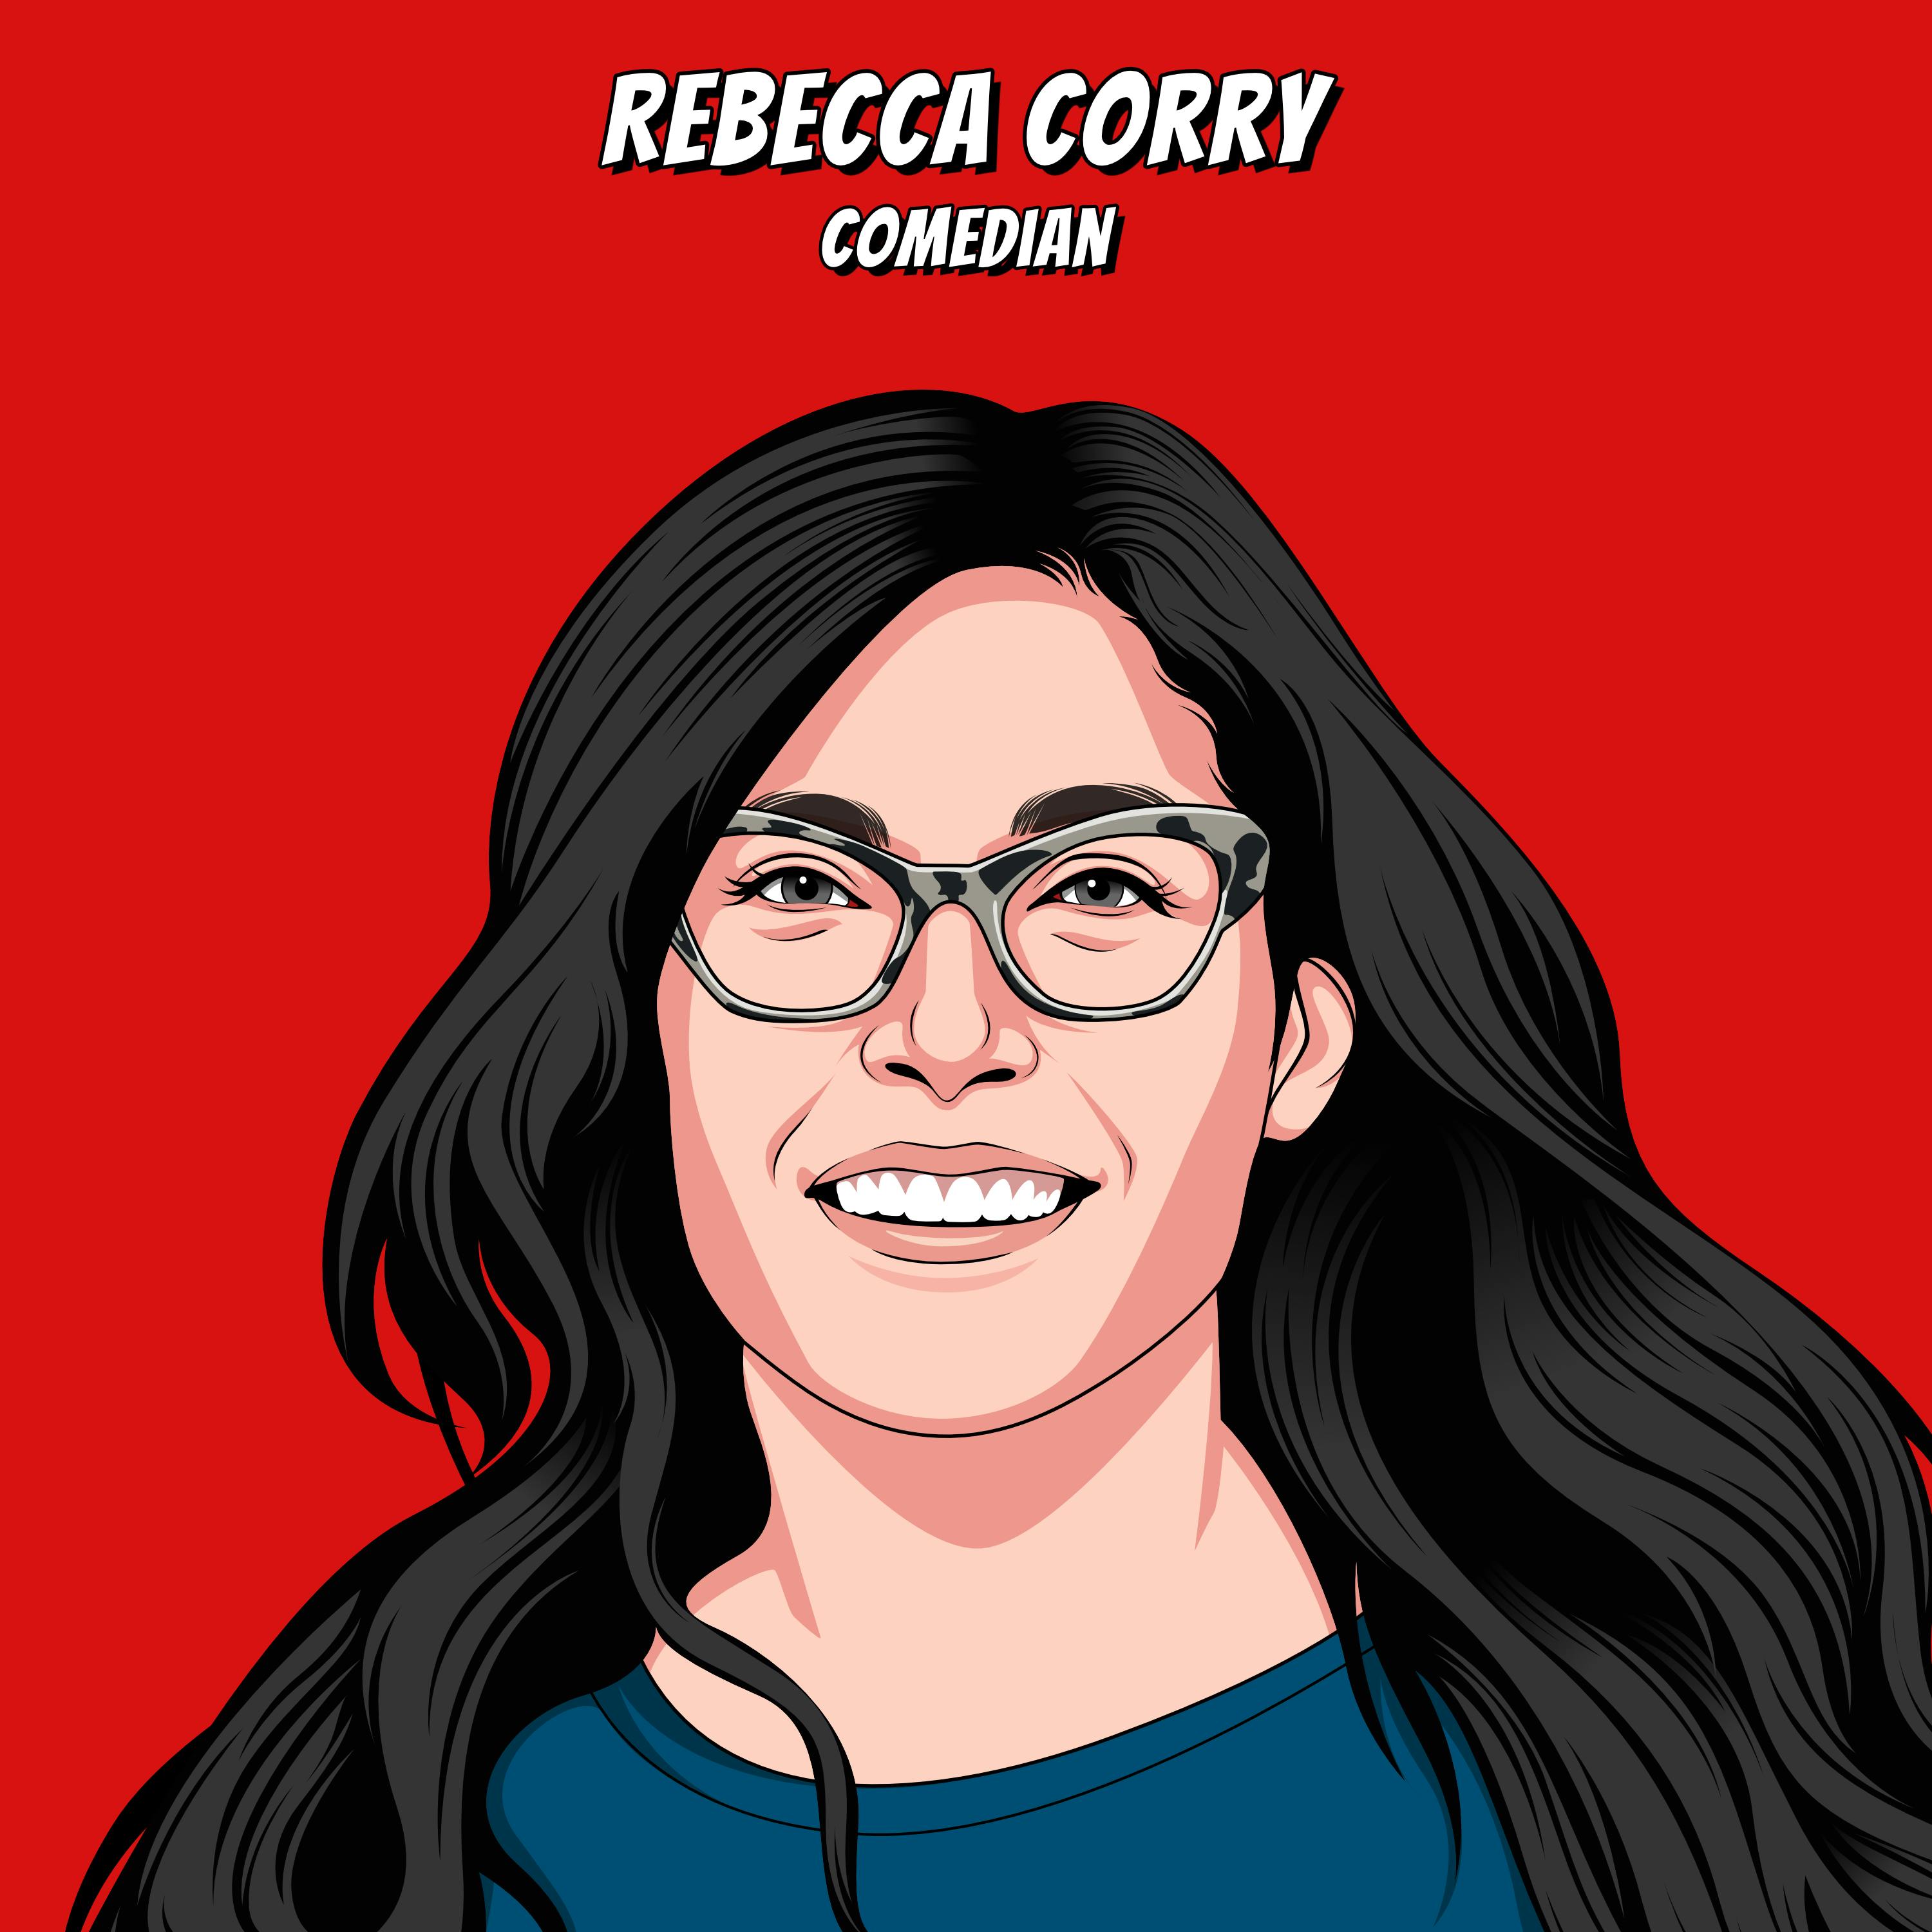 Comedian Rebecca Corry – The Pitfalls and Pit Bulls of Comedy